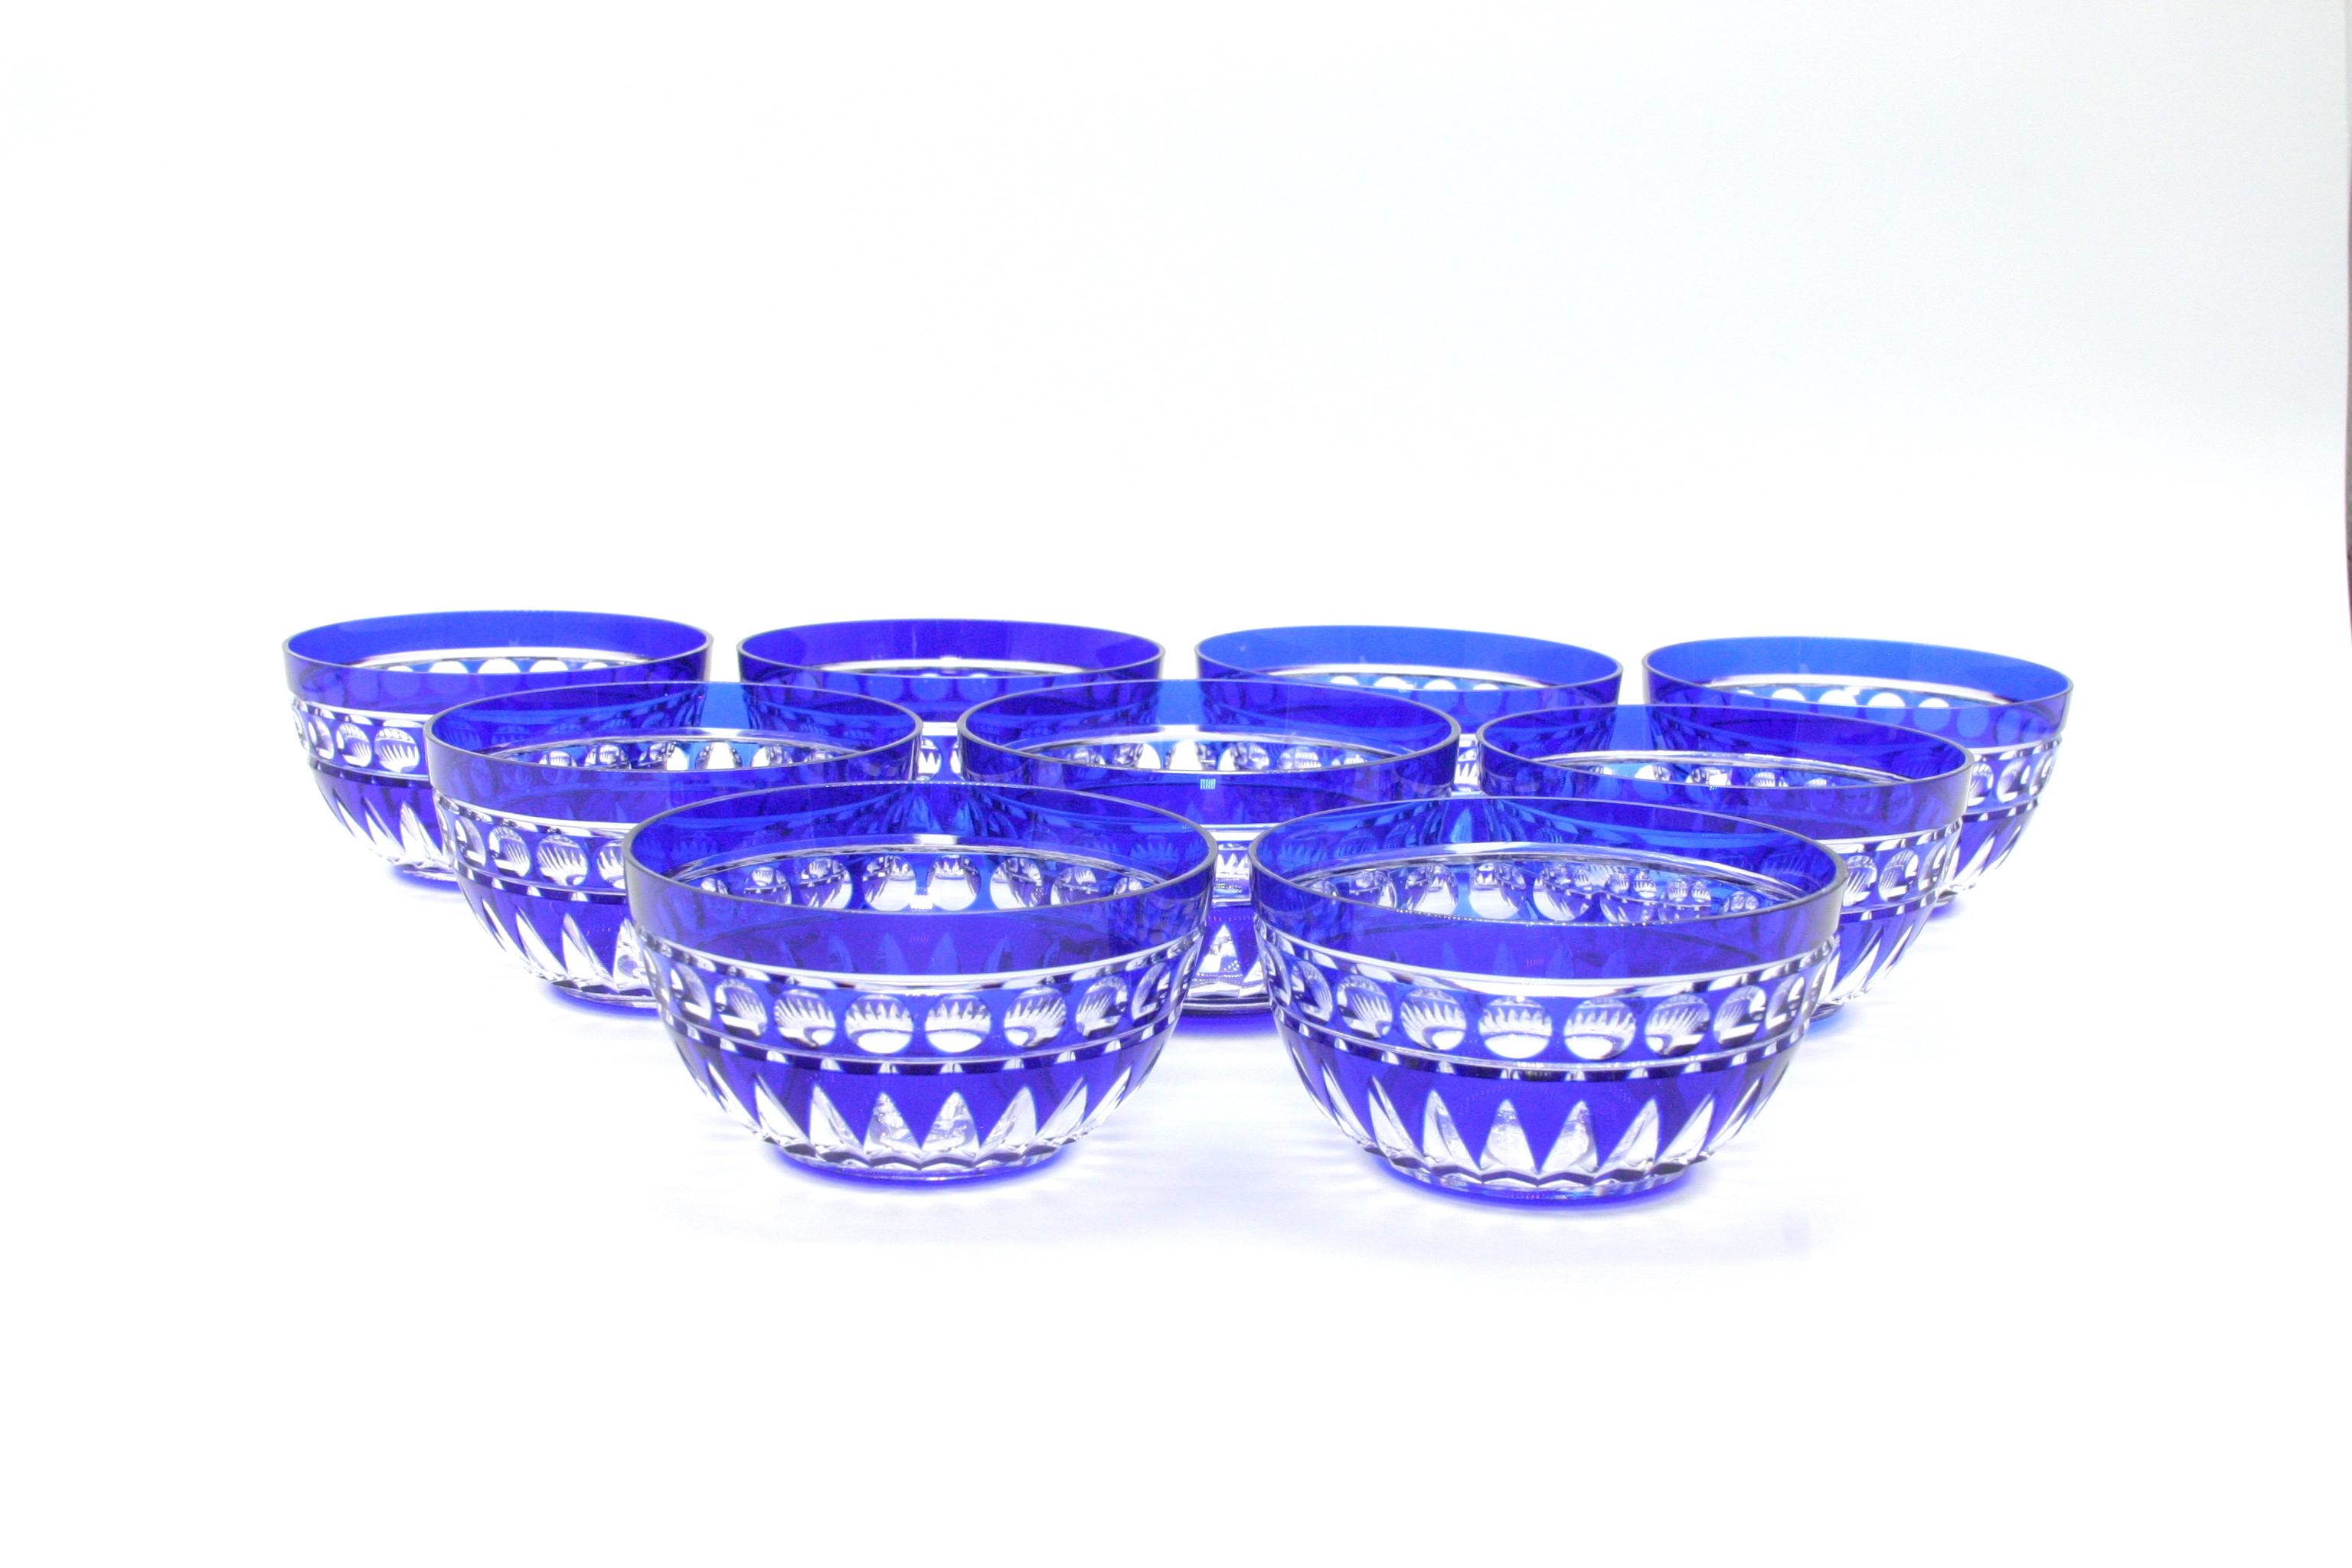 Exquisite set of Val Saint Lambert tableware cobalt blue crystal serving bowl service for 9 people. Val crystal is regarded as some of the most magnificent ever made and renowned for their exquisite color. This exquisite cut to clear crystal glass